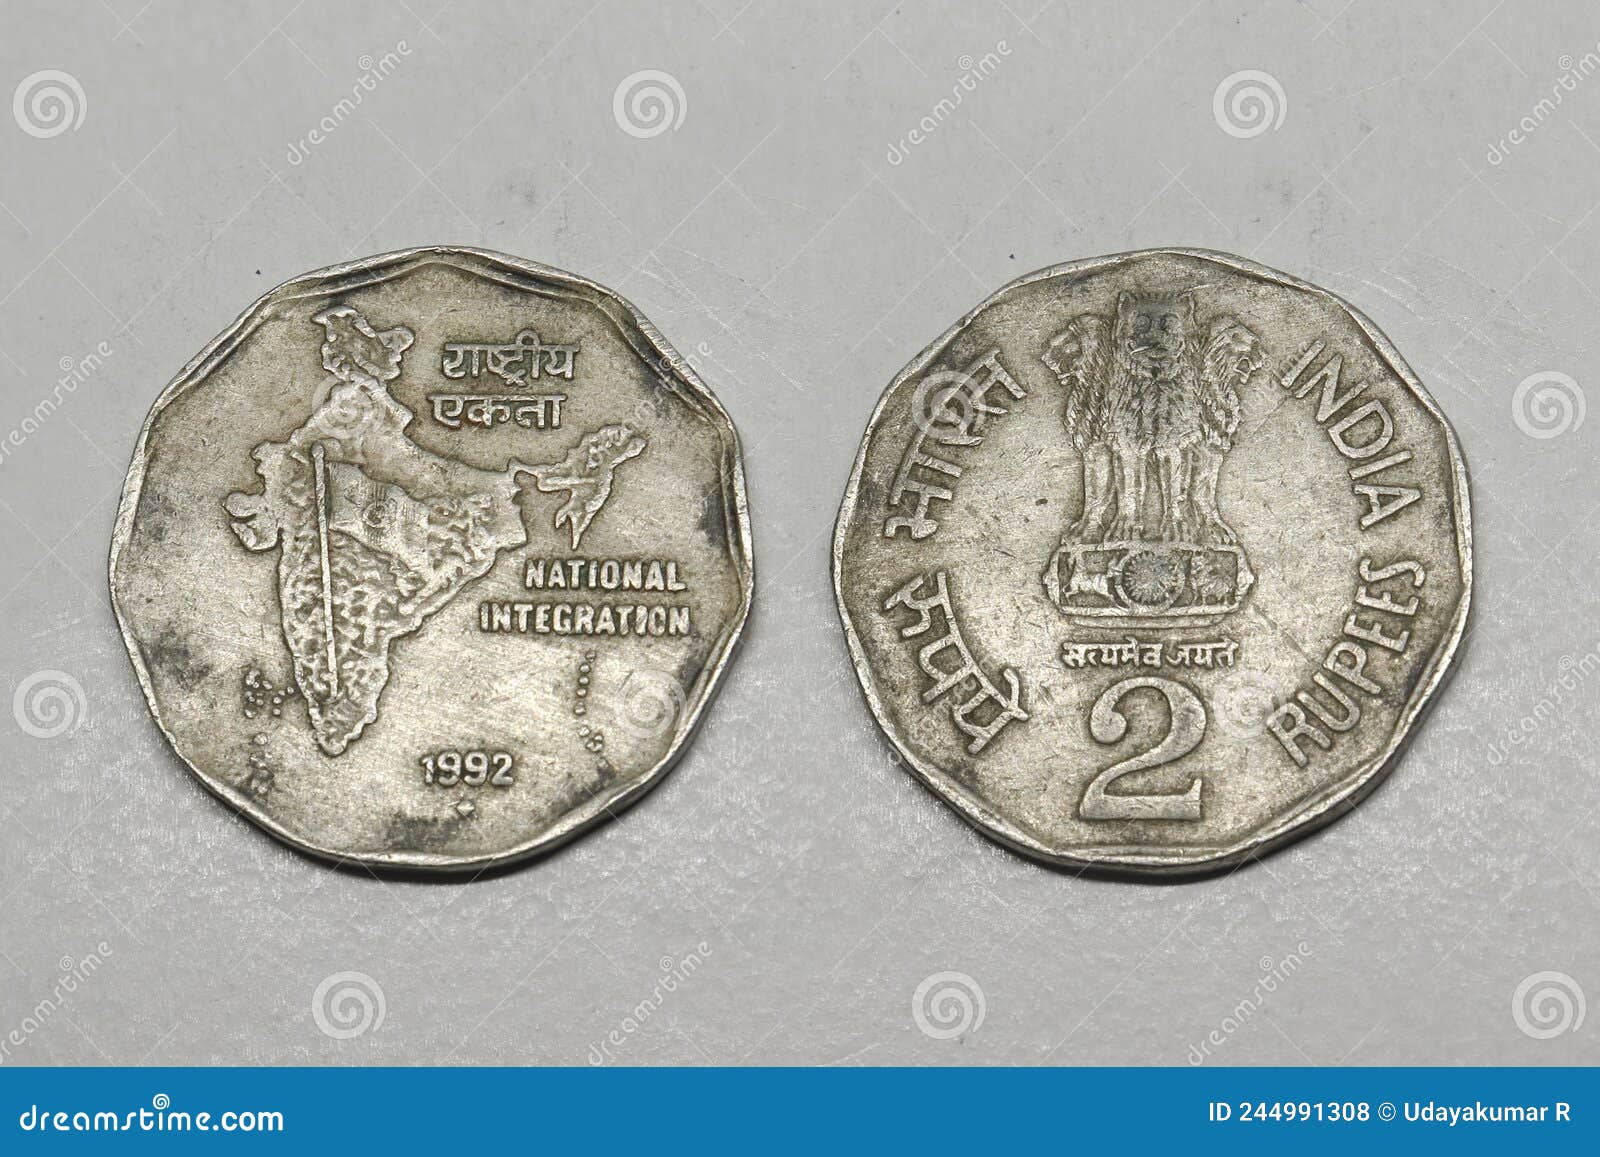 Indian Currency Two Rupees Silver Coin, Indian Currency, Money, Two ...